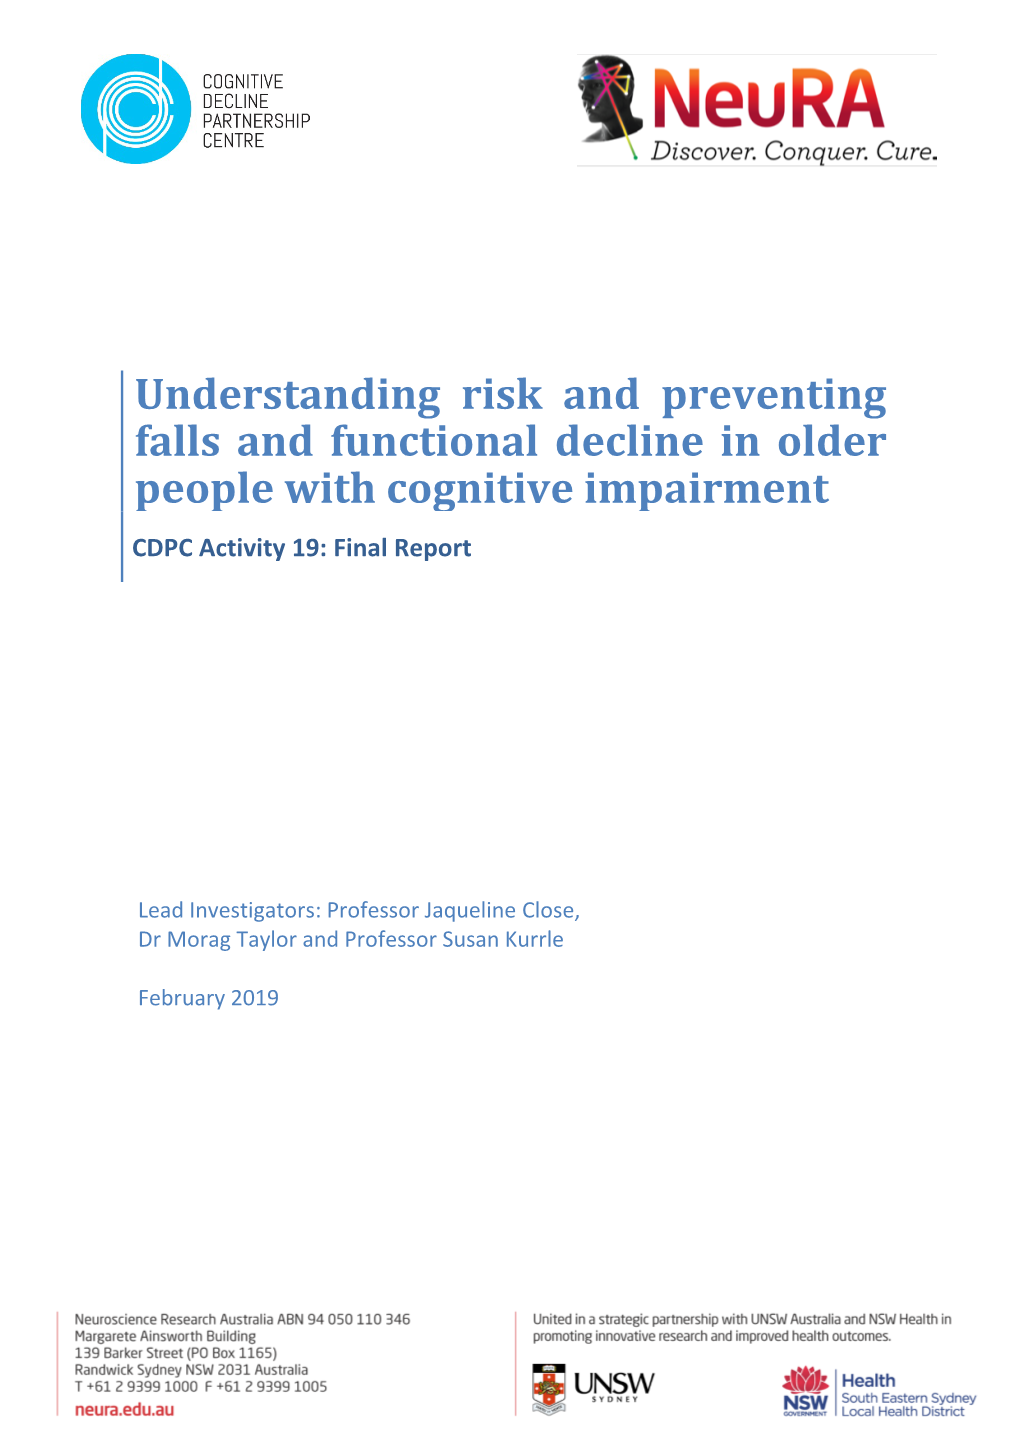 Understanding Risk and Preventing Falls and Functional Decline in Older People with Cognitive Impairment CDPC Activity 19: Final Report